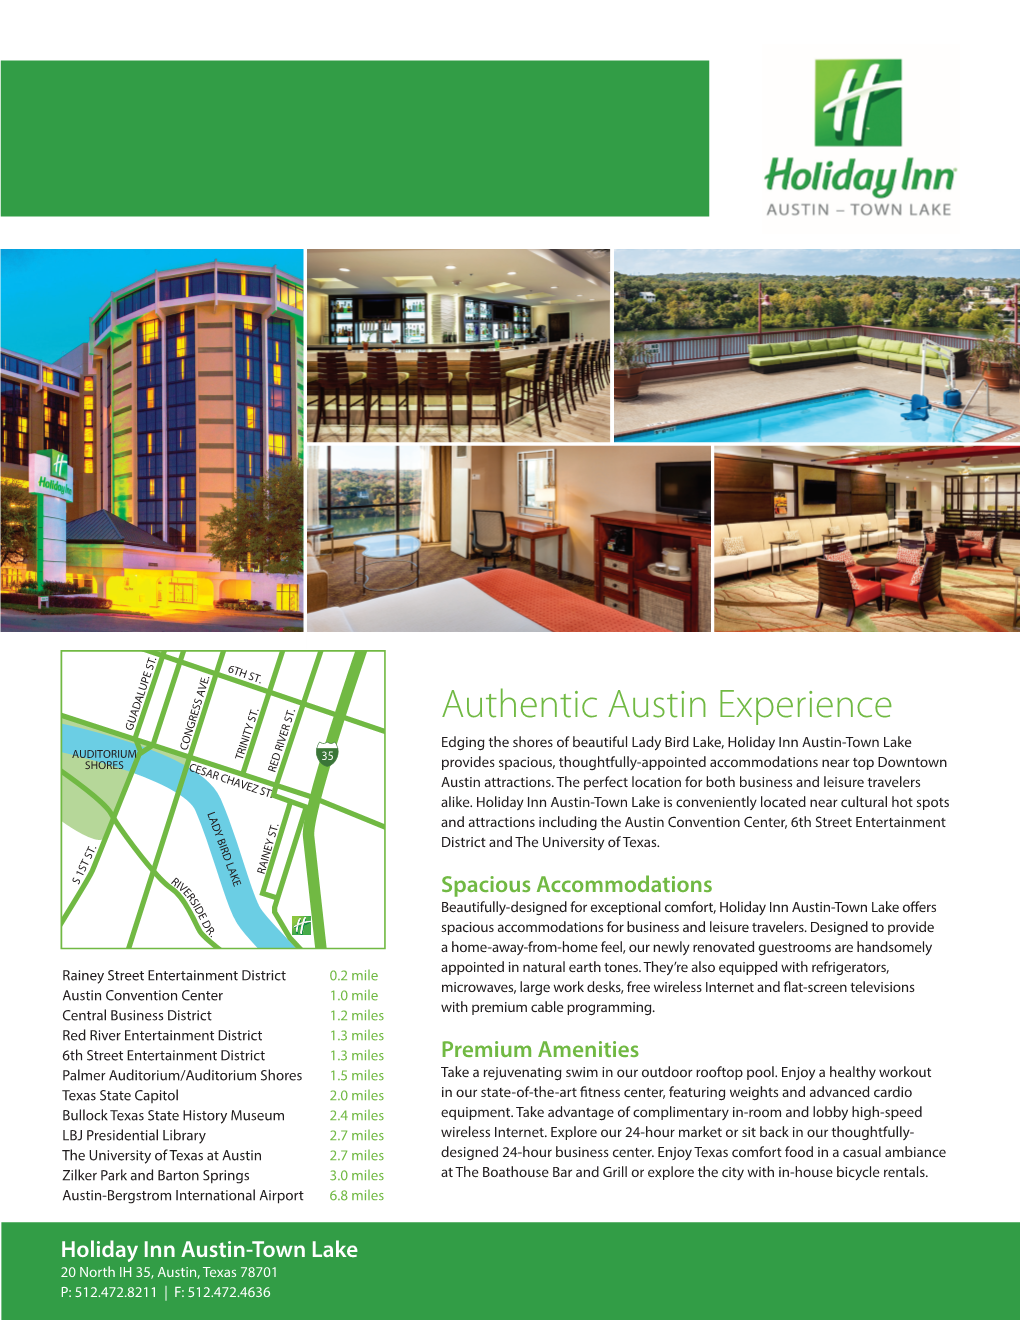 Authentic Austin Experience GUAD NGRESS Edging the Shores of Beautiful Lady Bird Lake, Holiday Inn Austin-Town Lake CO